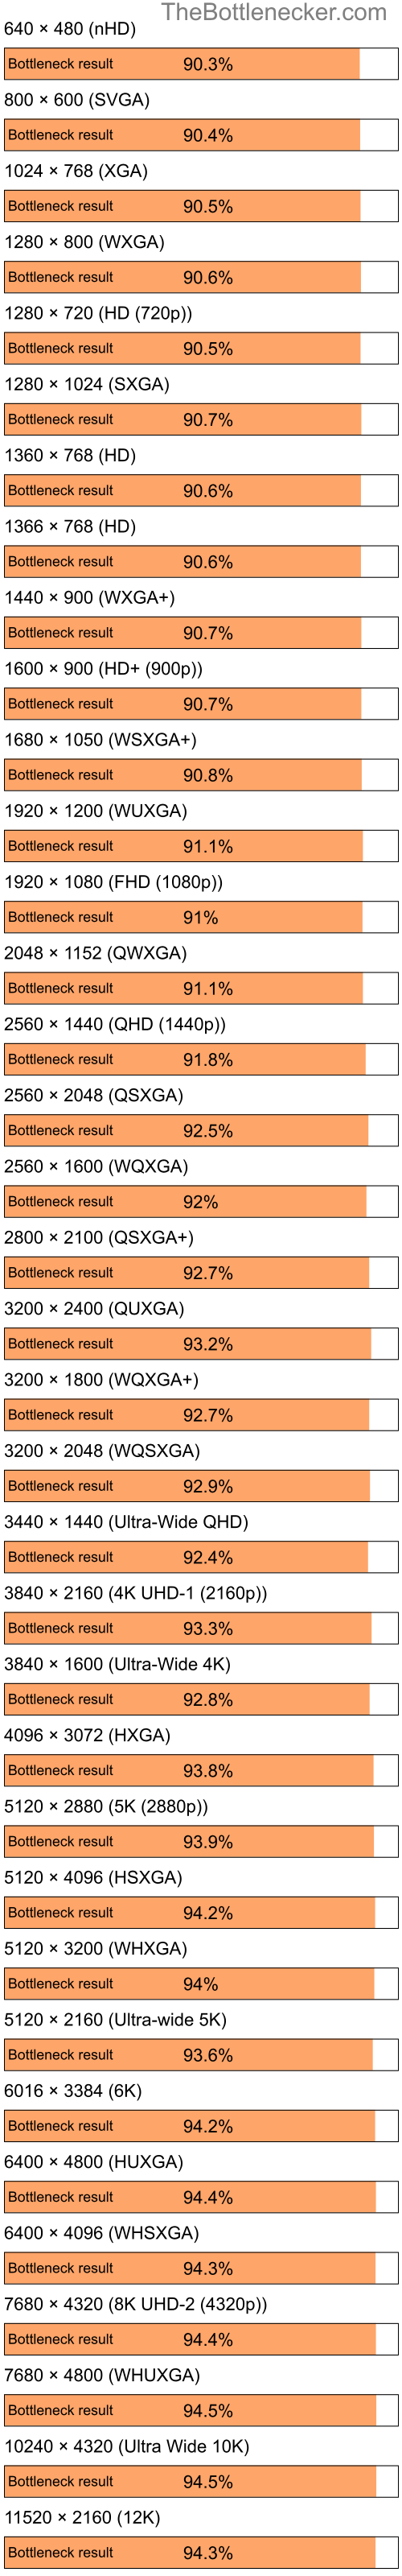 Bottleneck results by resolution for Intel Pentium 4 and NVIDIA GeForce2 MX in General Tasks